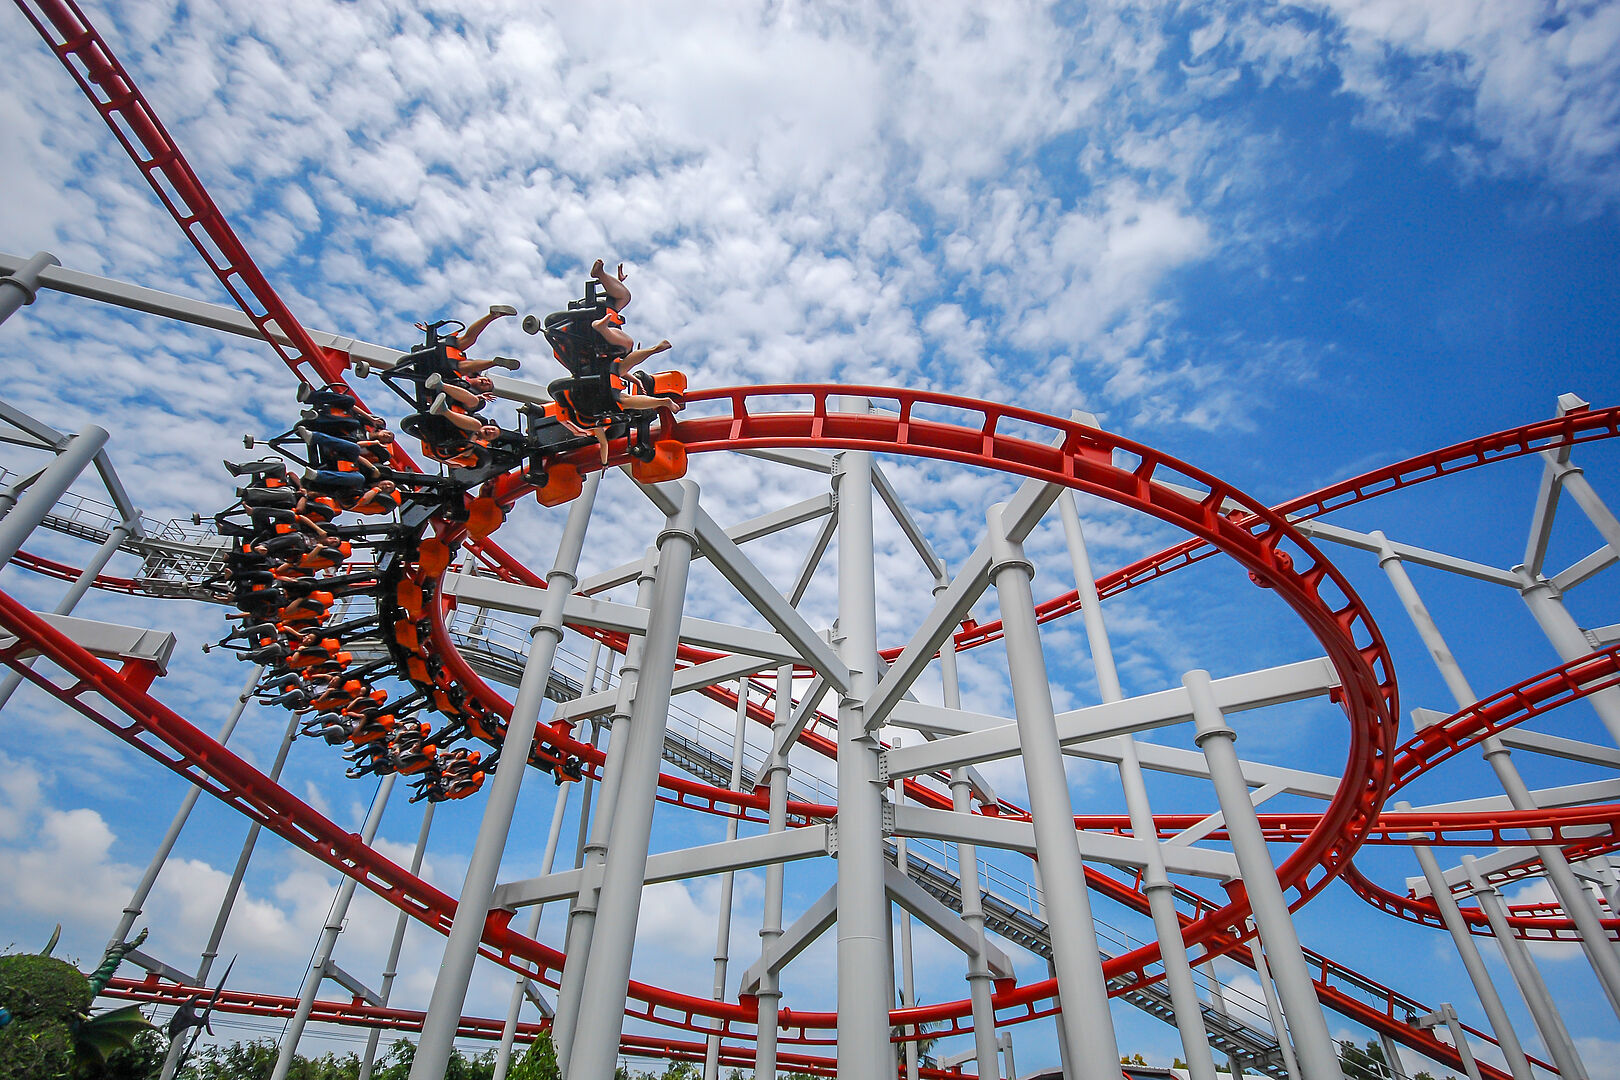 Inspection Requirements for Amusement Parks and Devices